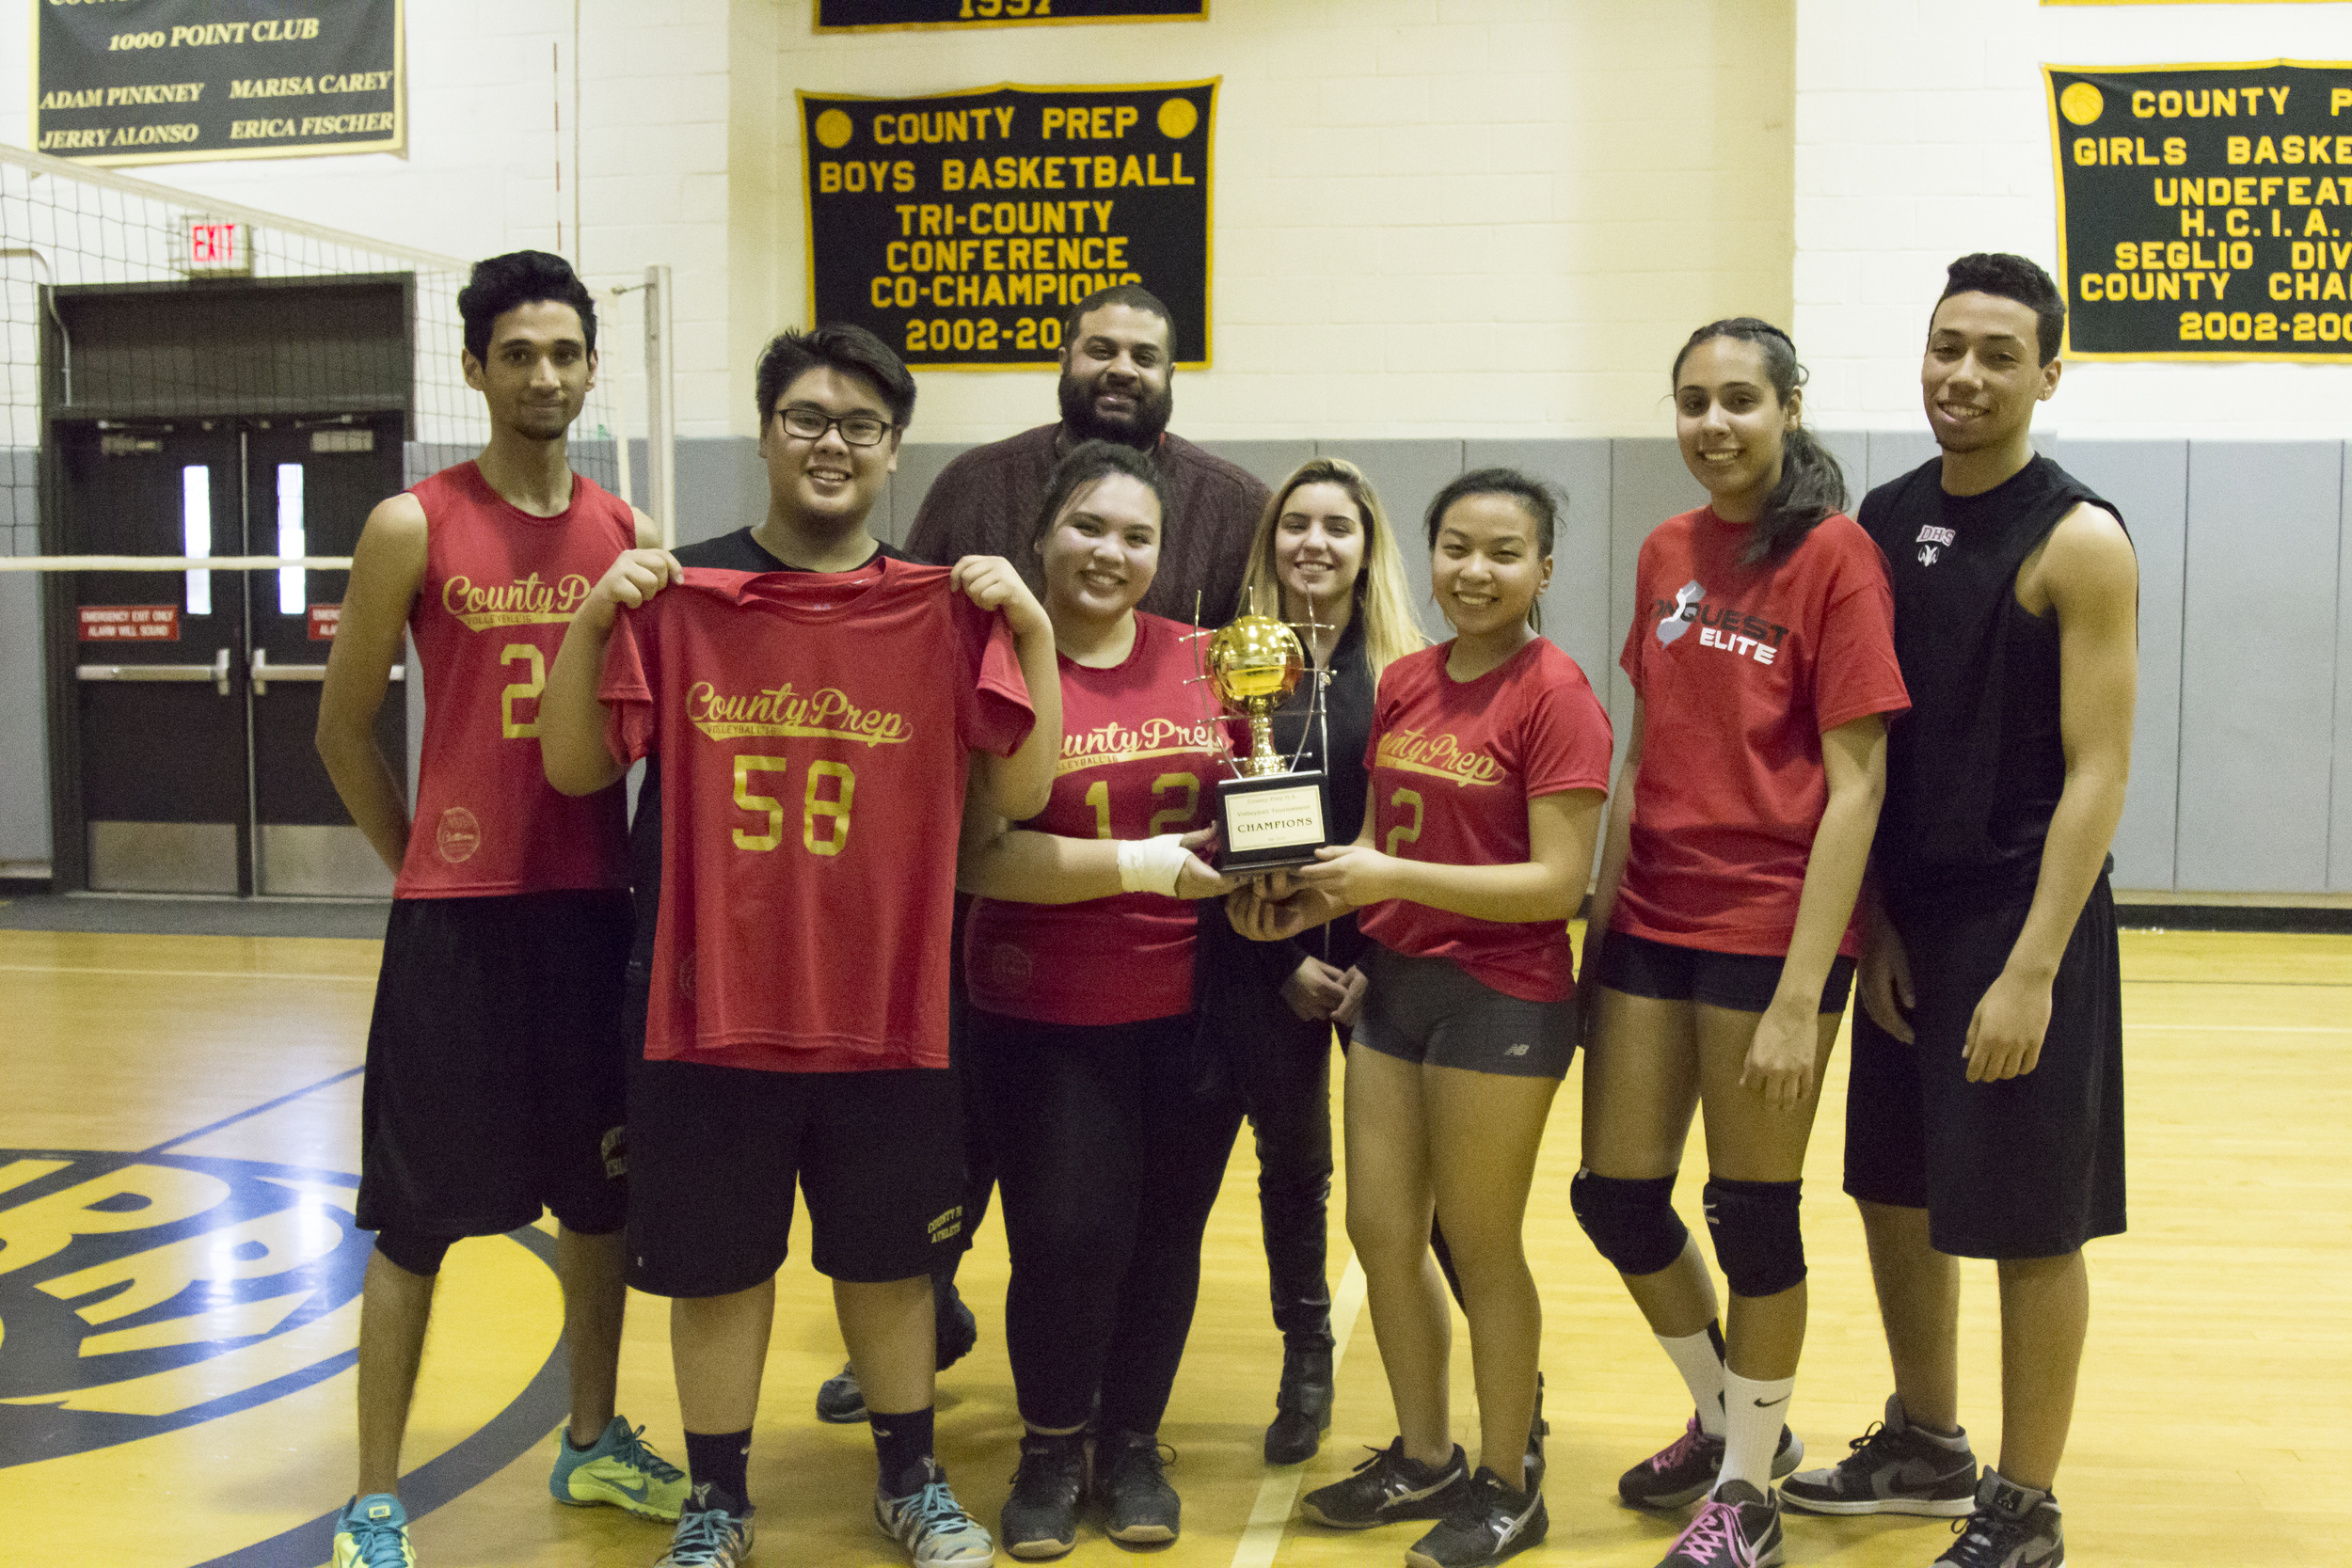 County Prep High School Annual Volleyball Tournament